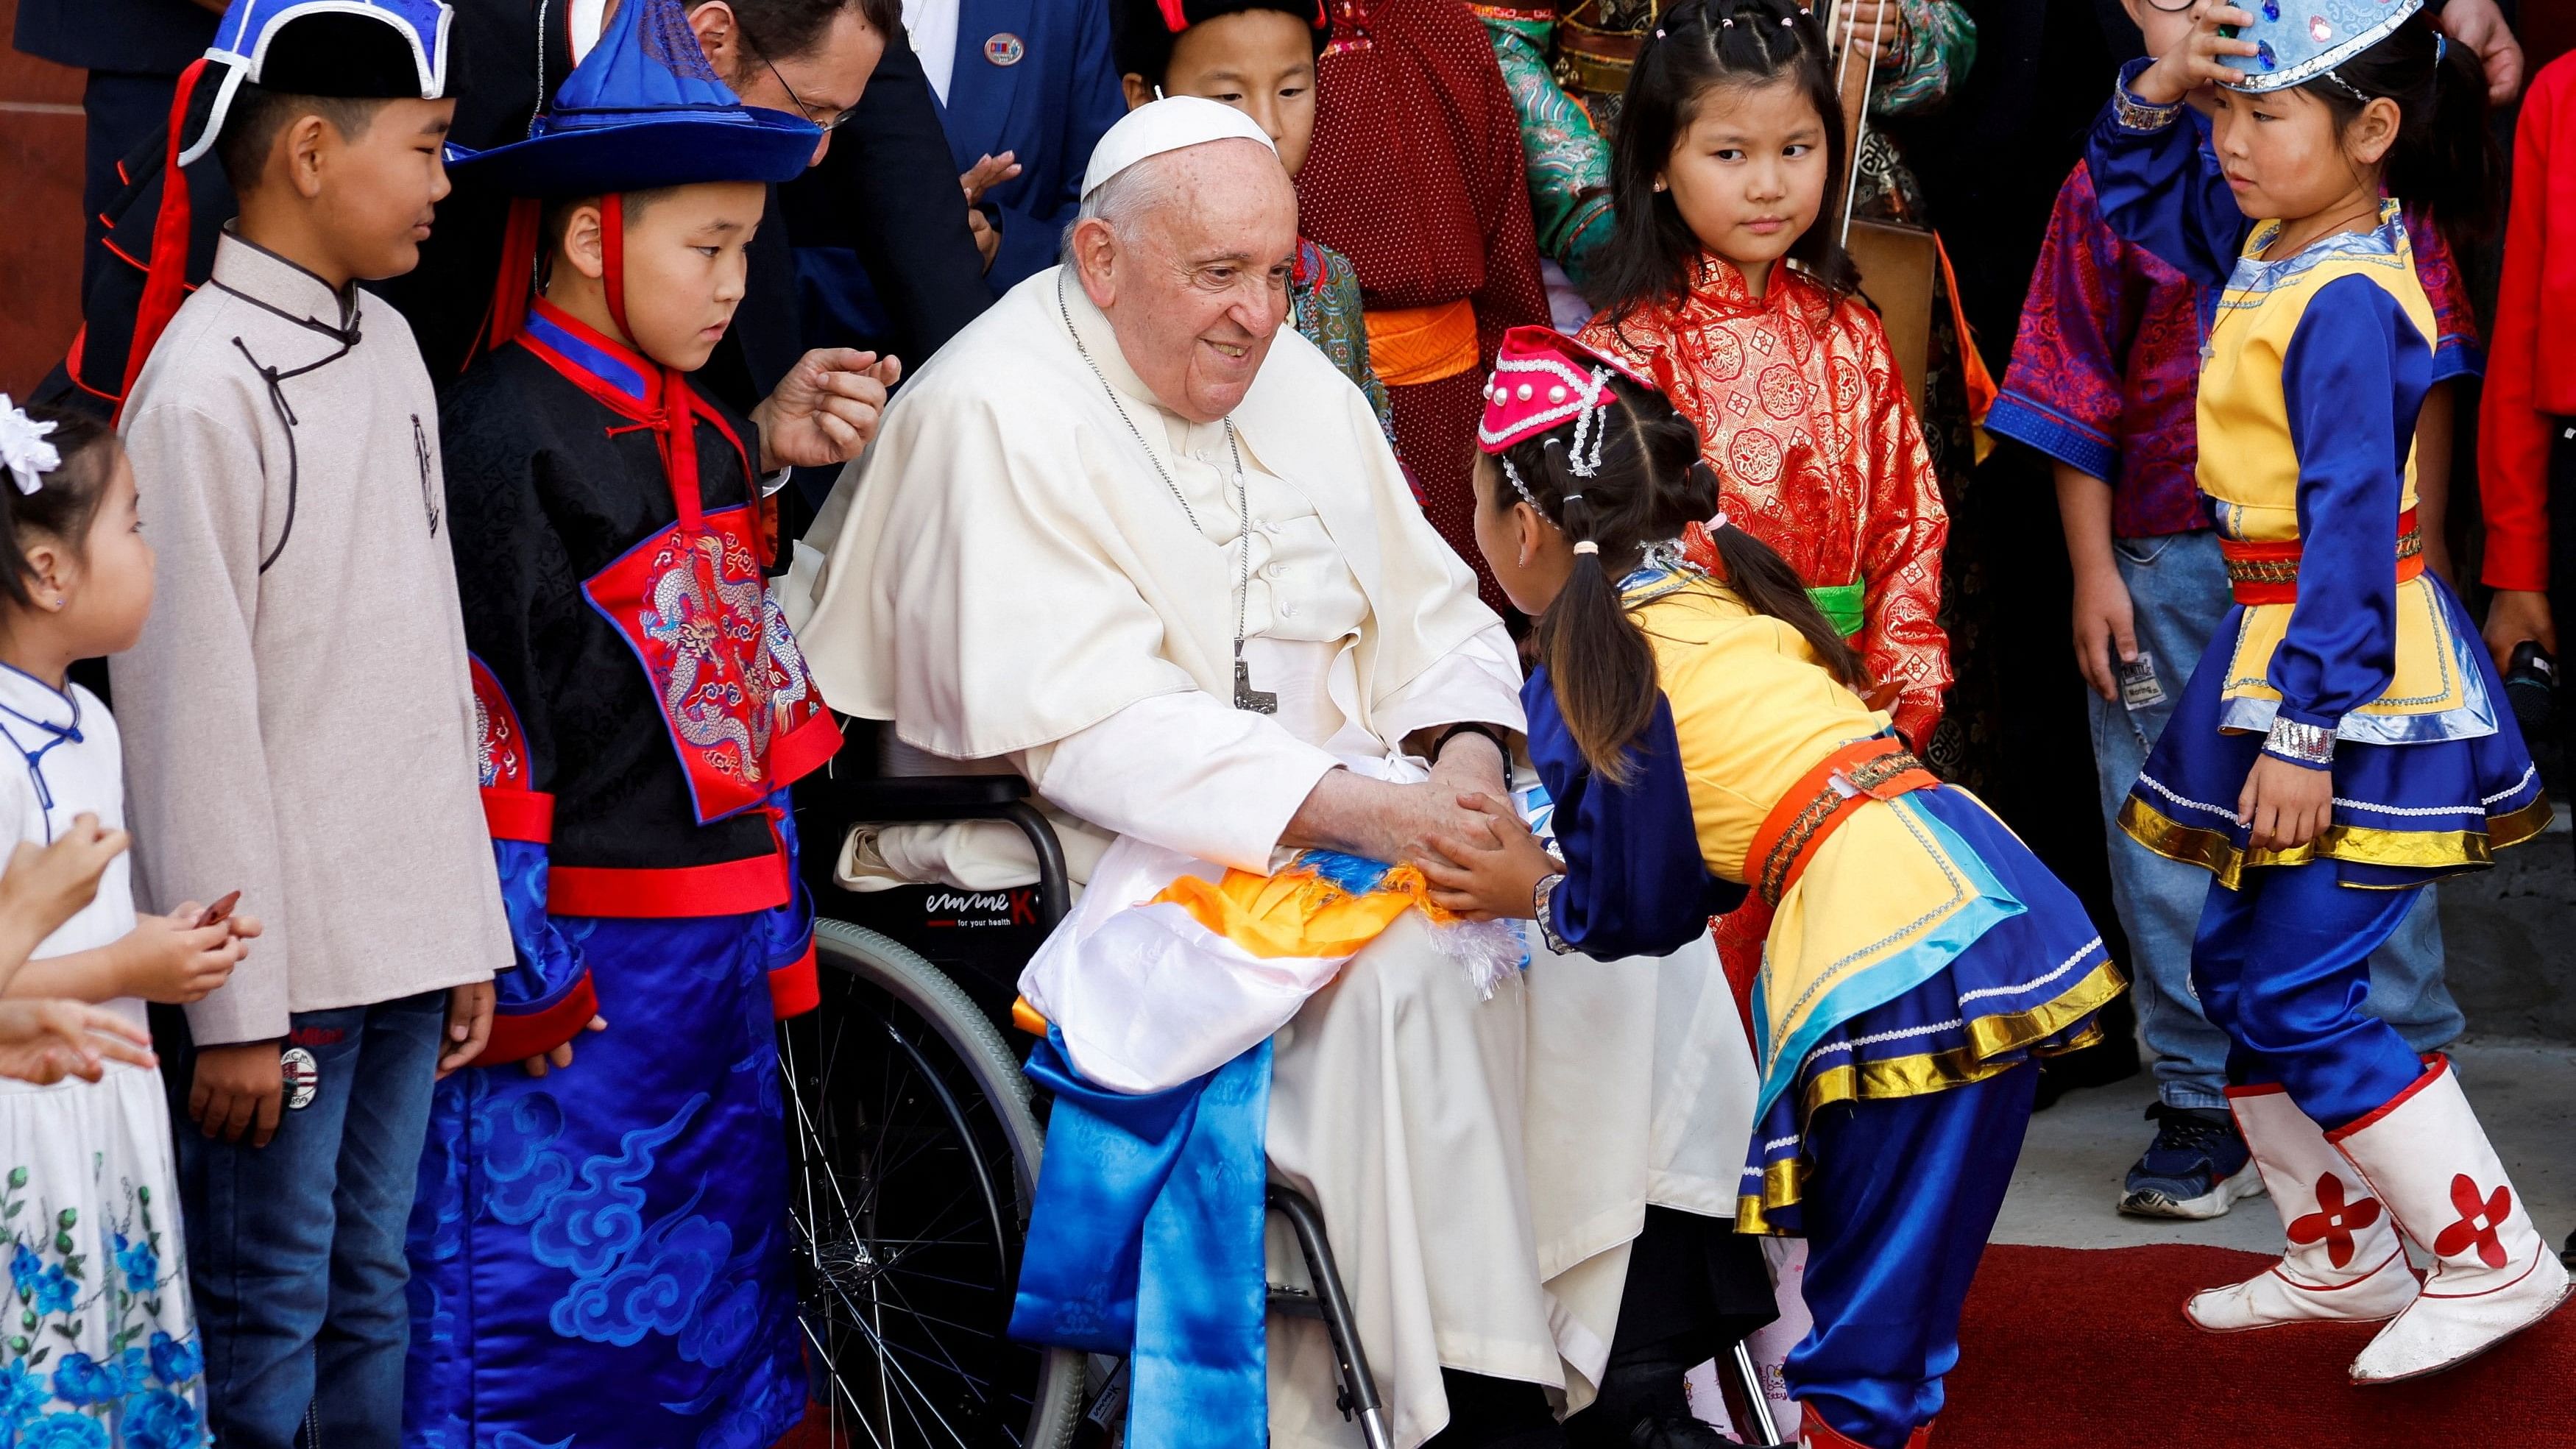 <div class="paragraphs"><p>Pope Francis greets a child during a welcome ceremony at the bishop's house during his Apostolic Journey, in Ulaanbaatar, Mongolia.</p></div>